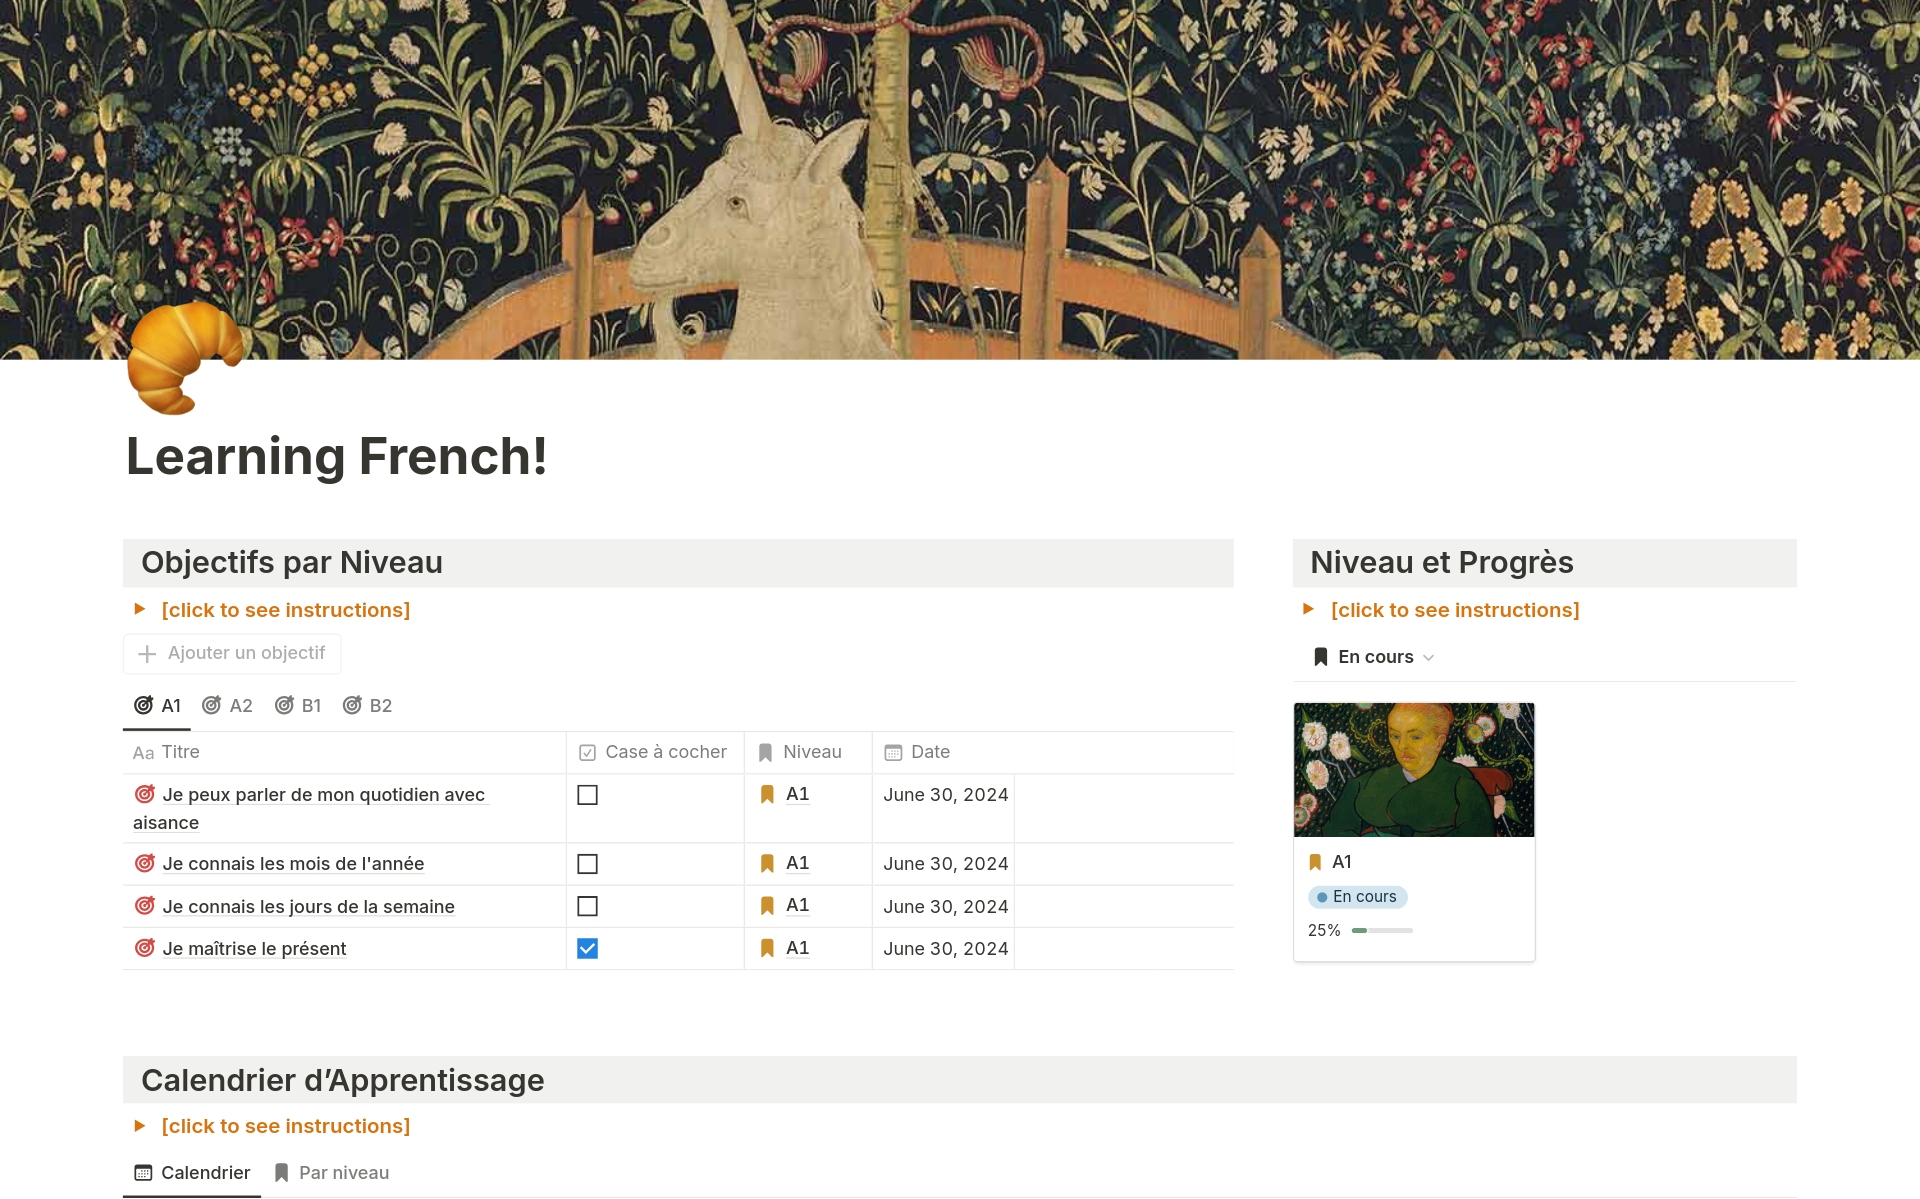 Master French effortlessly with this template. Track progress, set goals, and organise lessons efficiently. Perfect for all levels from A1 to B2.